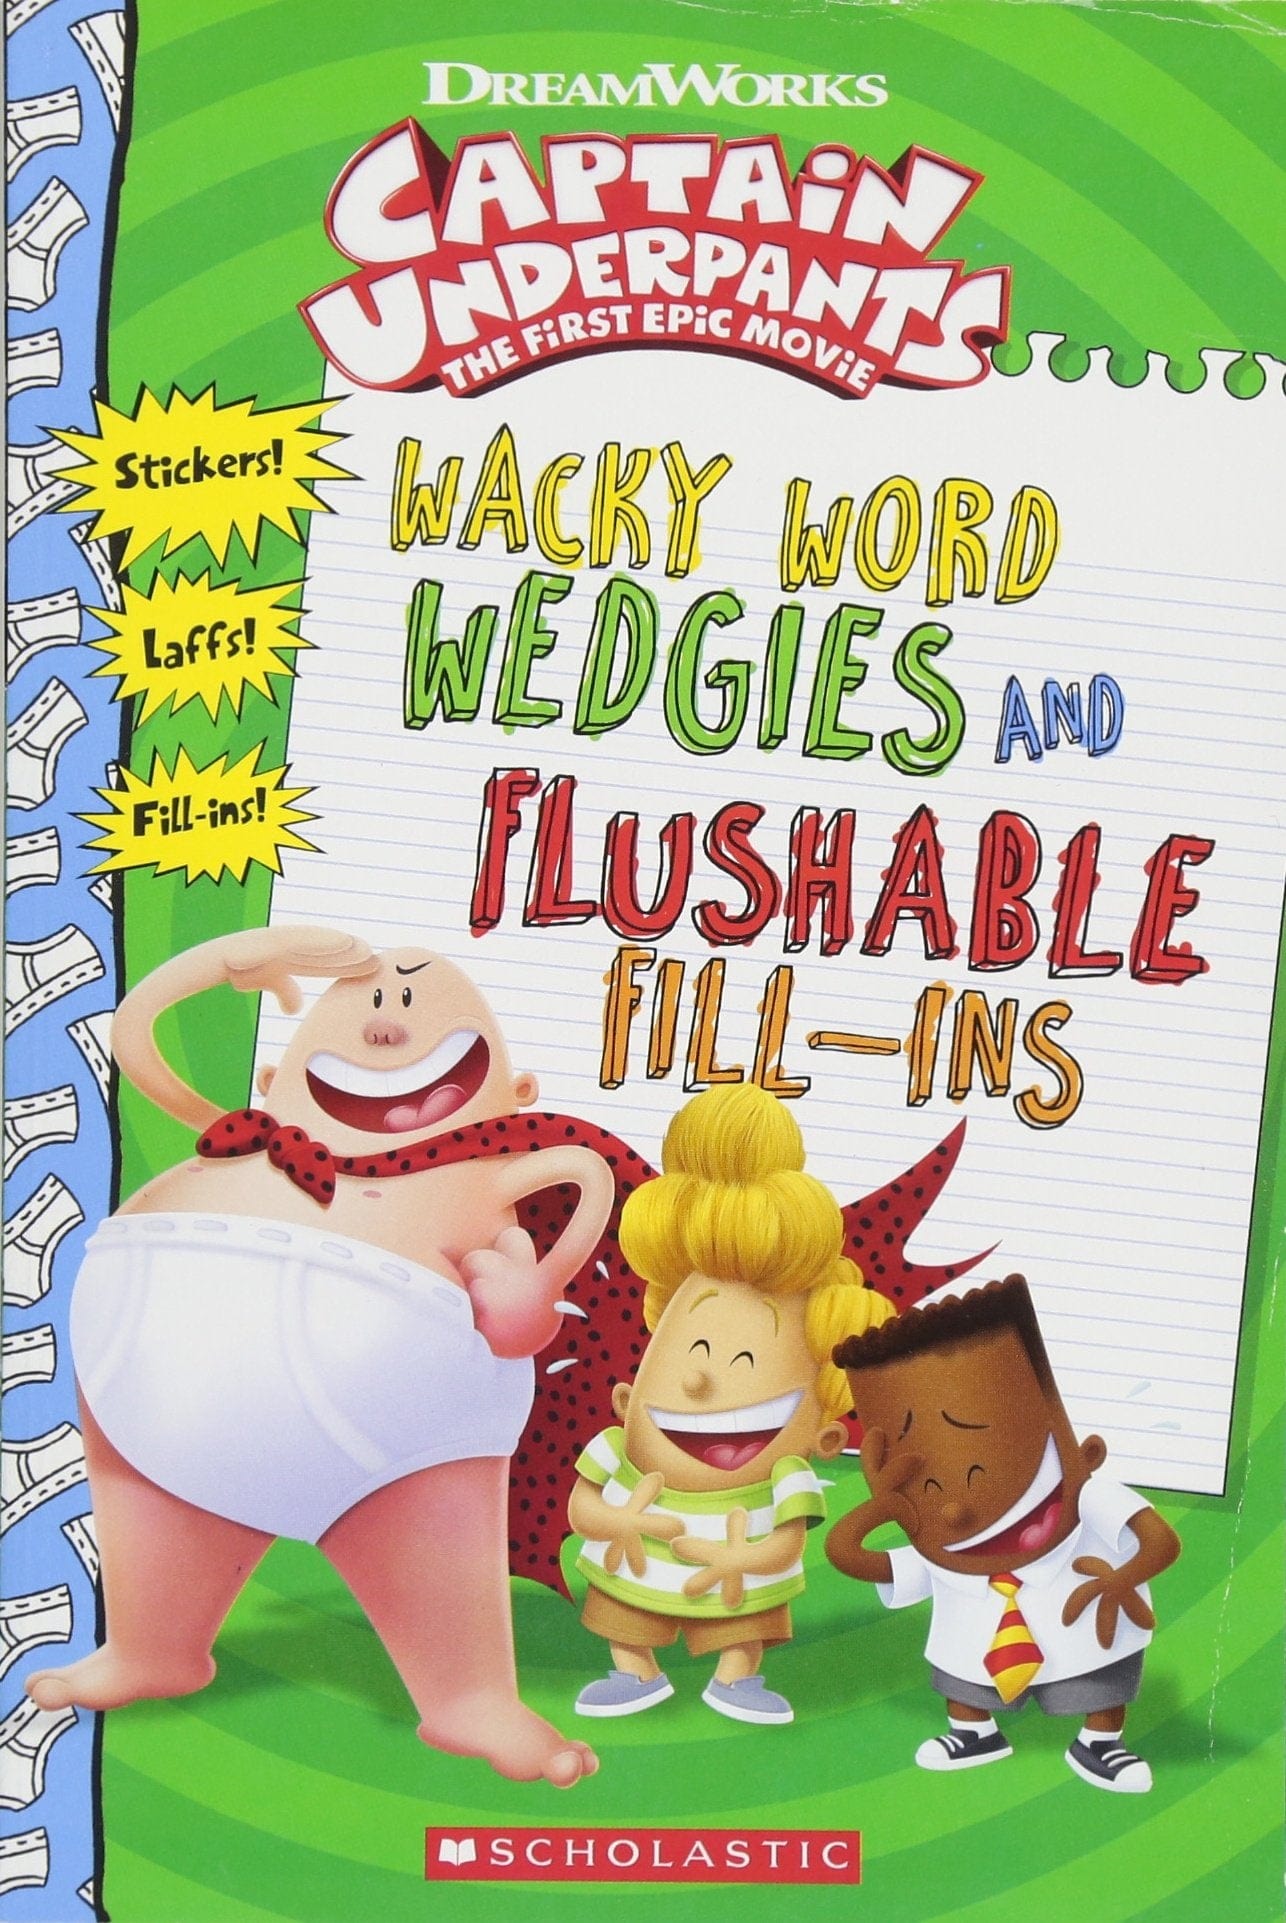 Captain Underpants: First Epic Movie - Wacky Word Wedgies and Flushable Fill-Ins TP - Third Eye